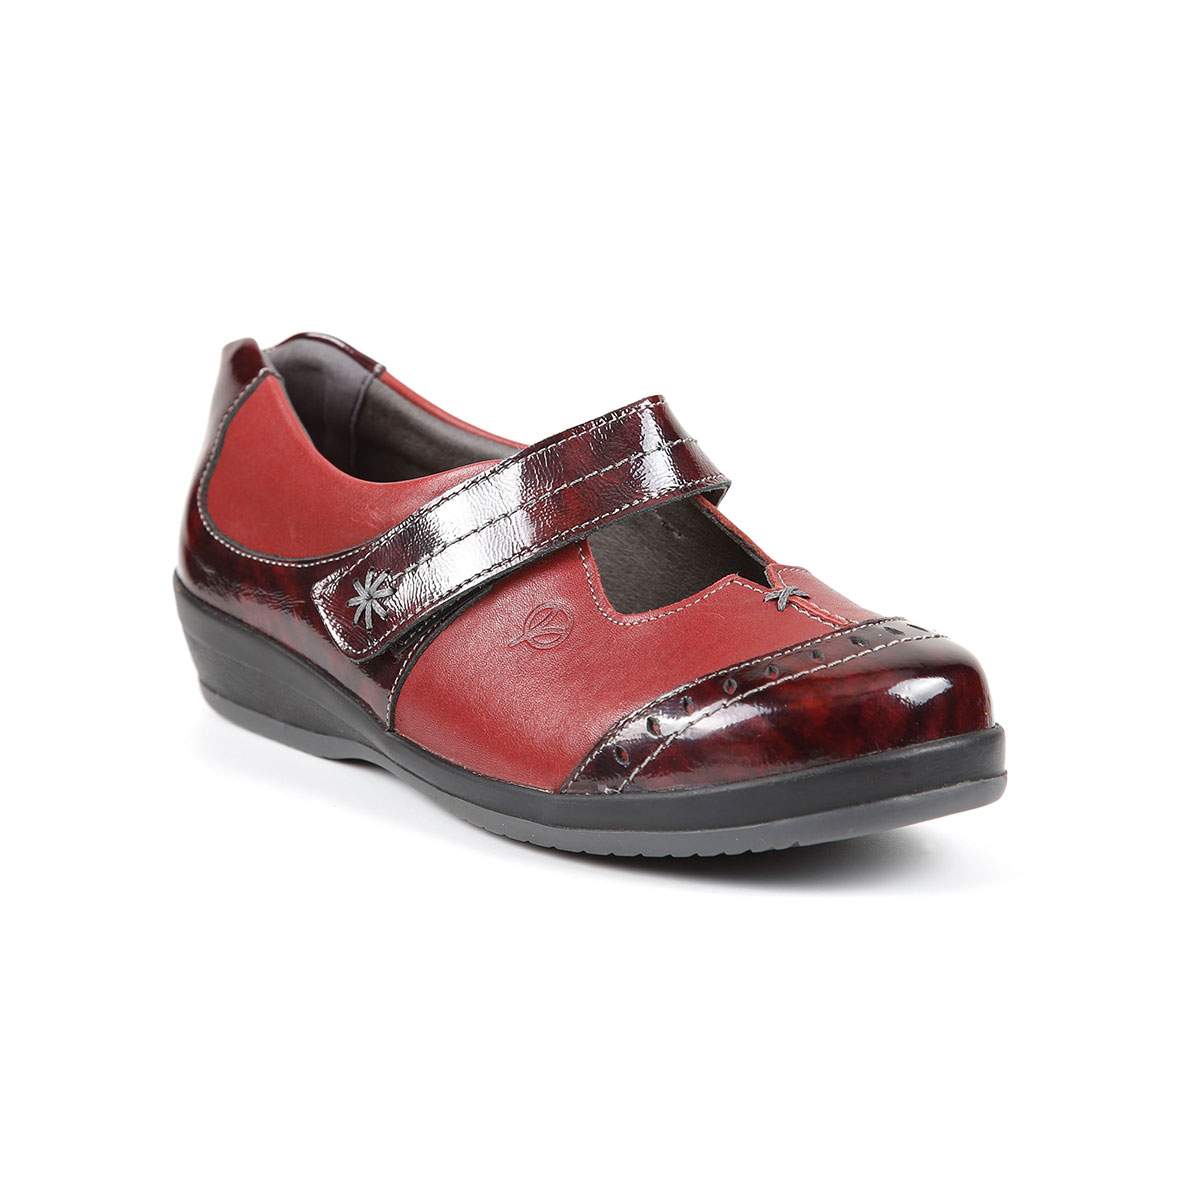 Burgundy and red Filton shoe